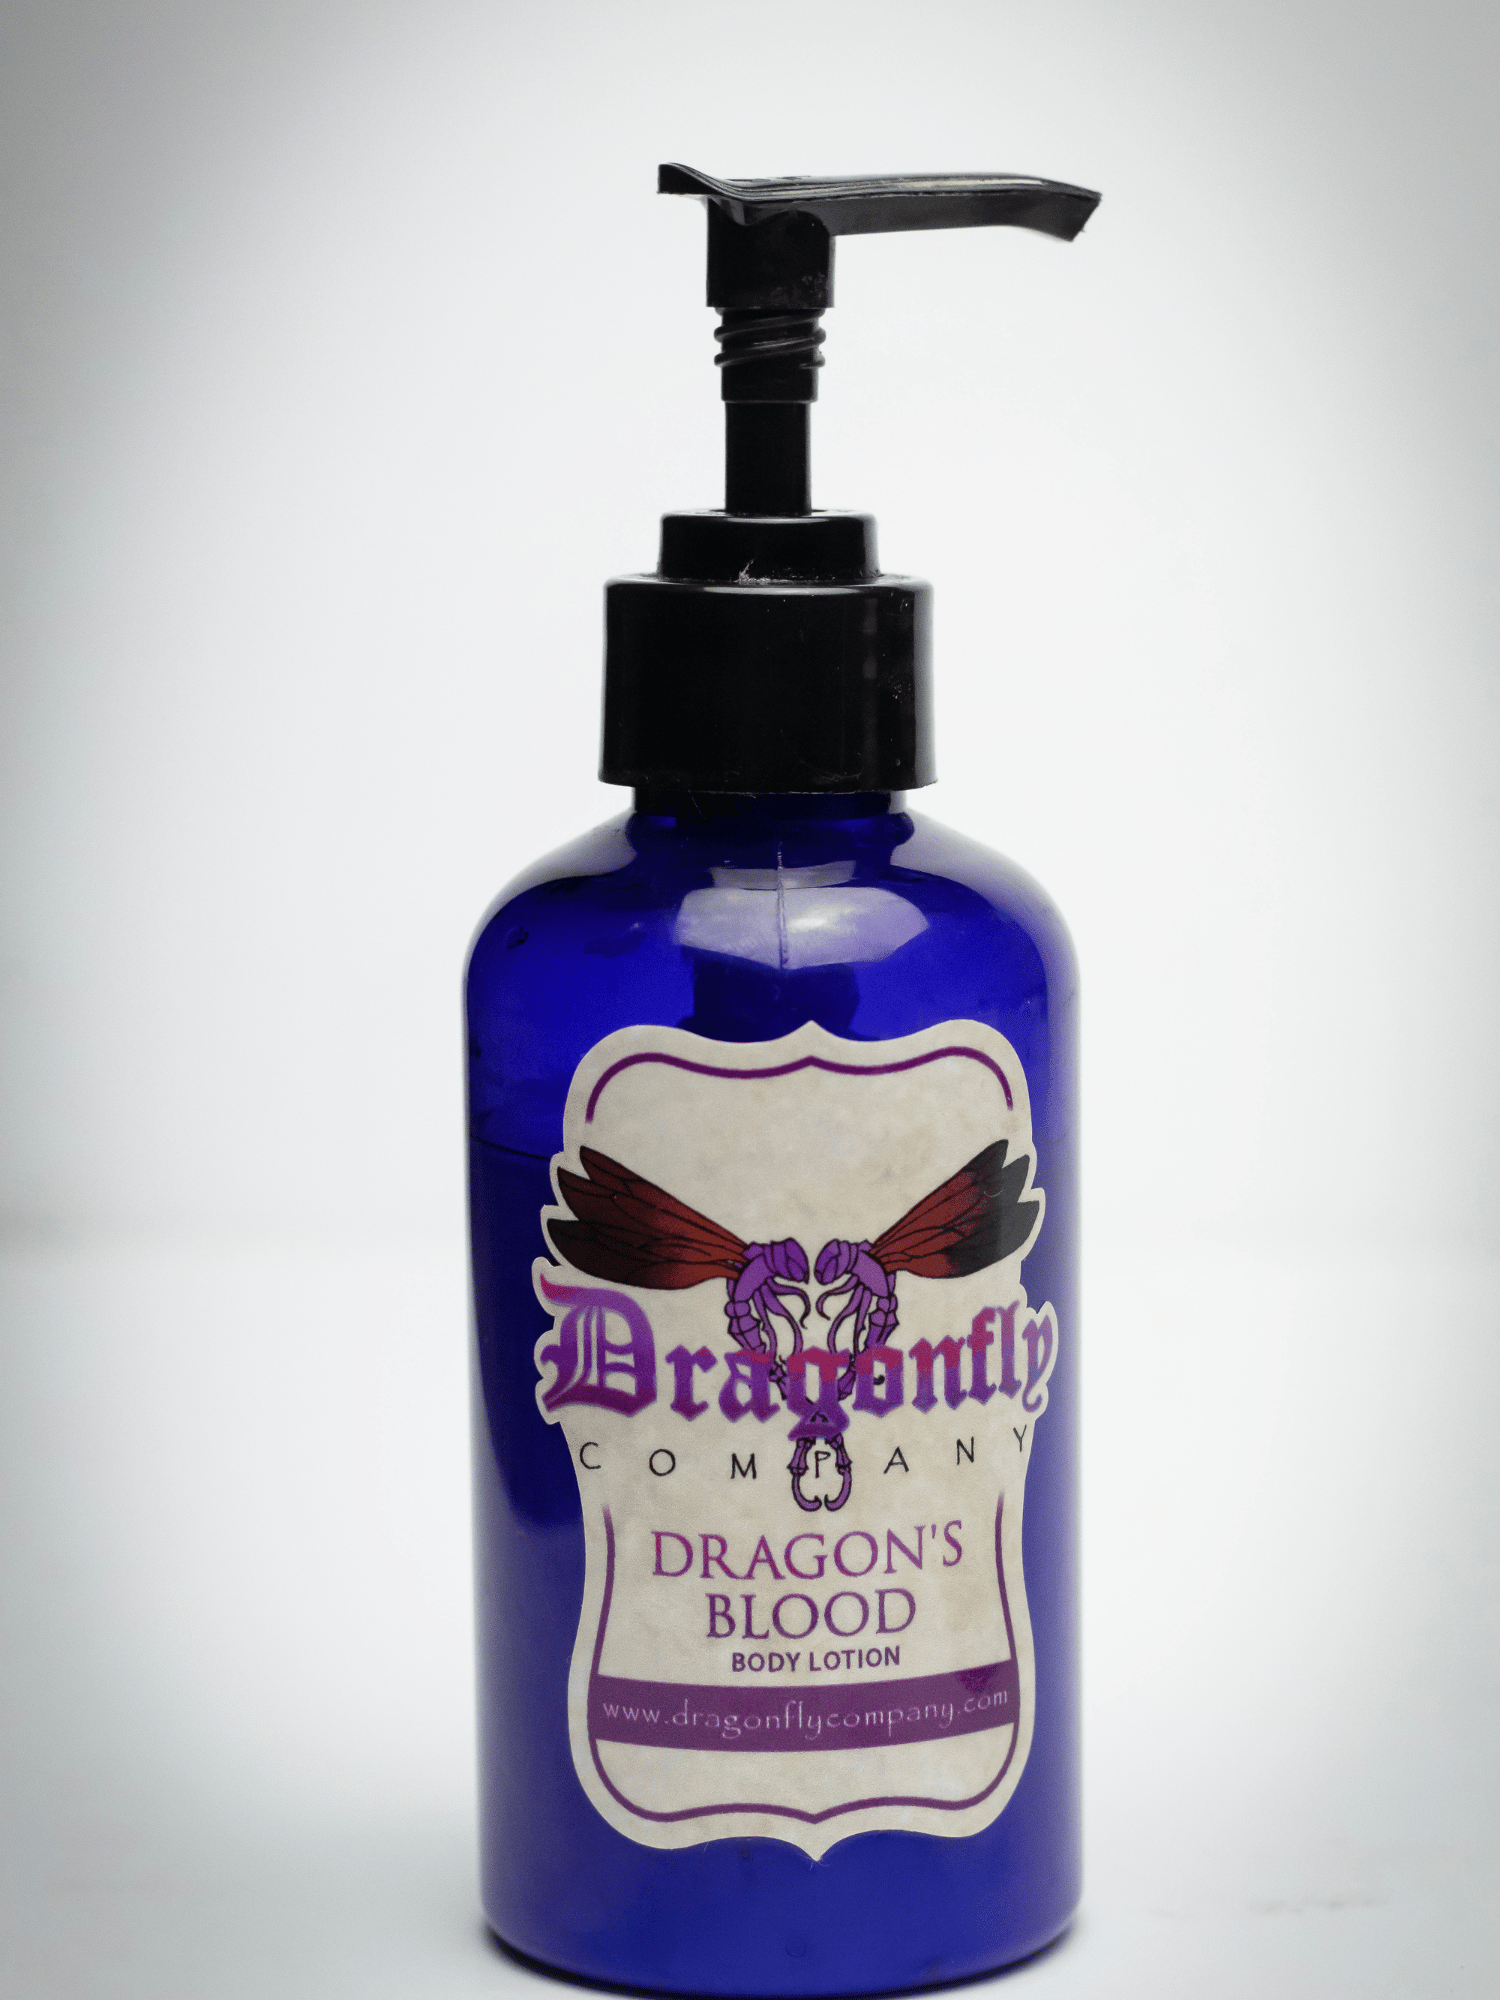 Dragon's Blood Body Lotion is magical